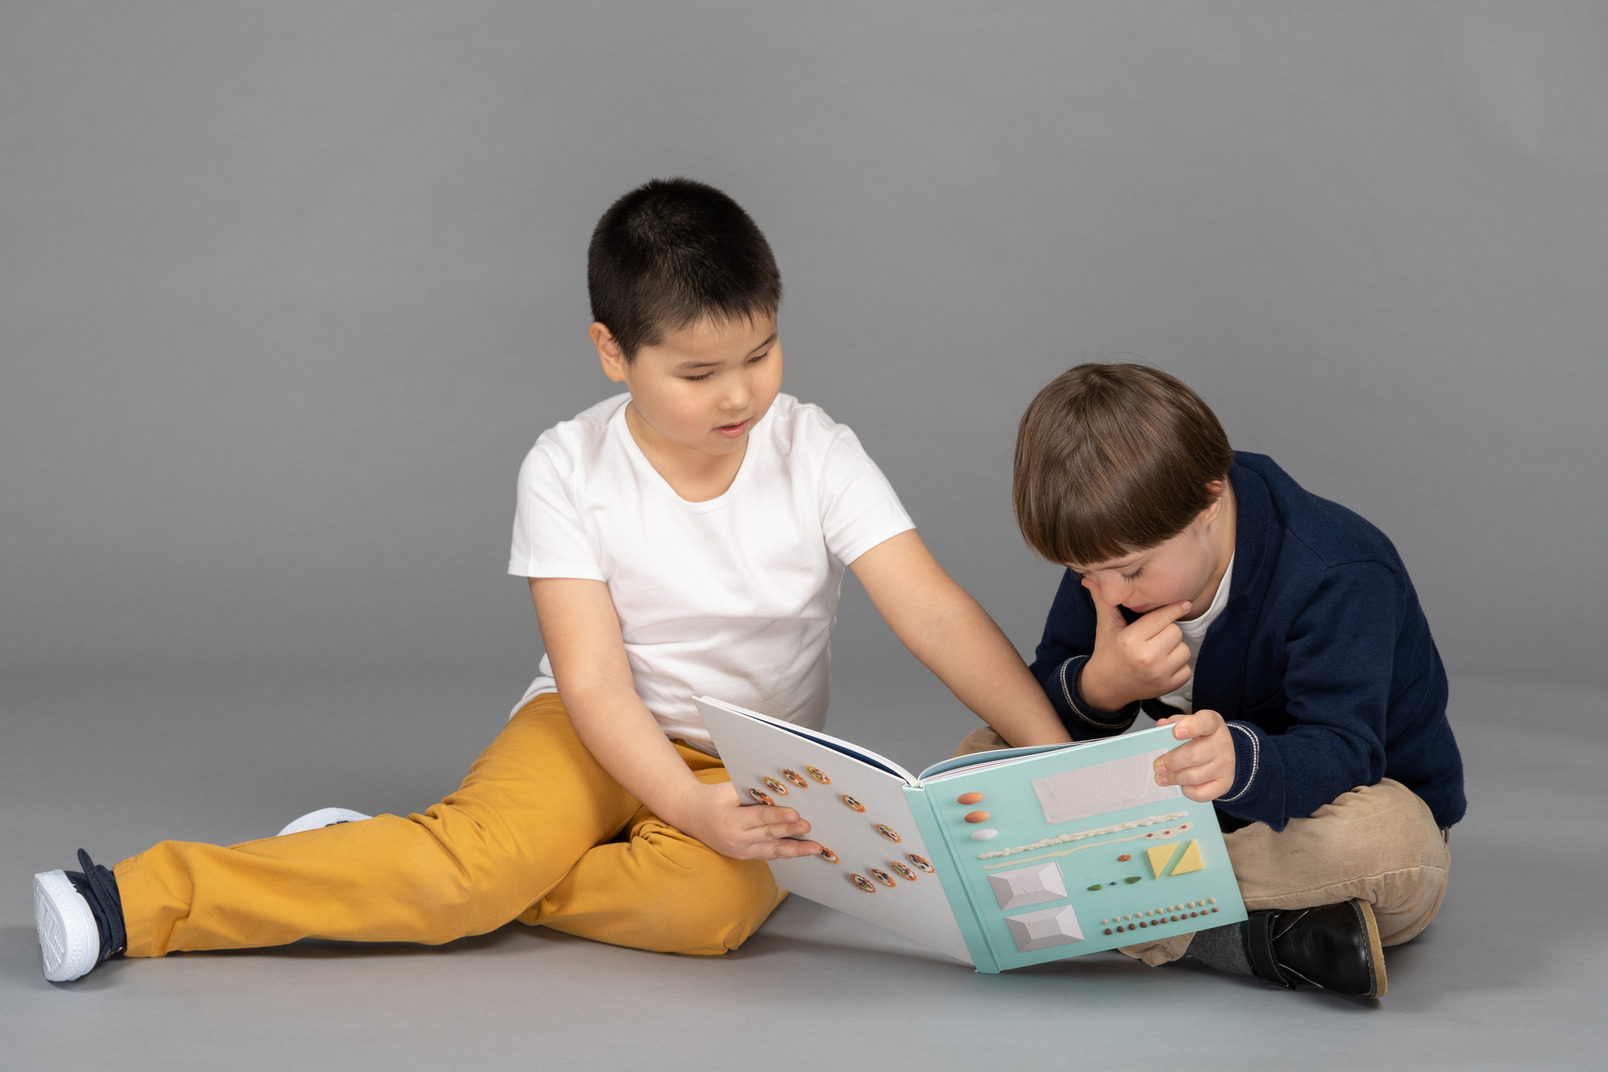 Two little boys looking at book illustrations